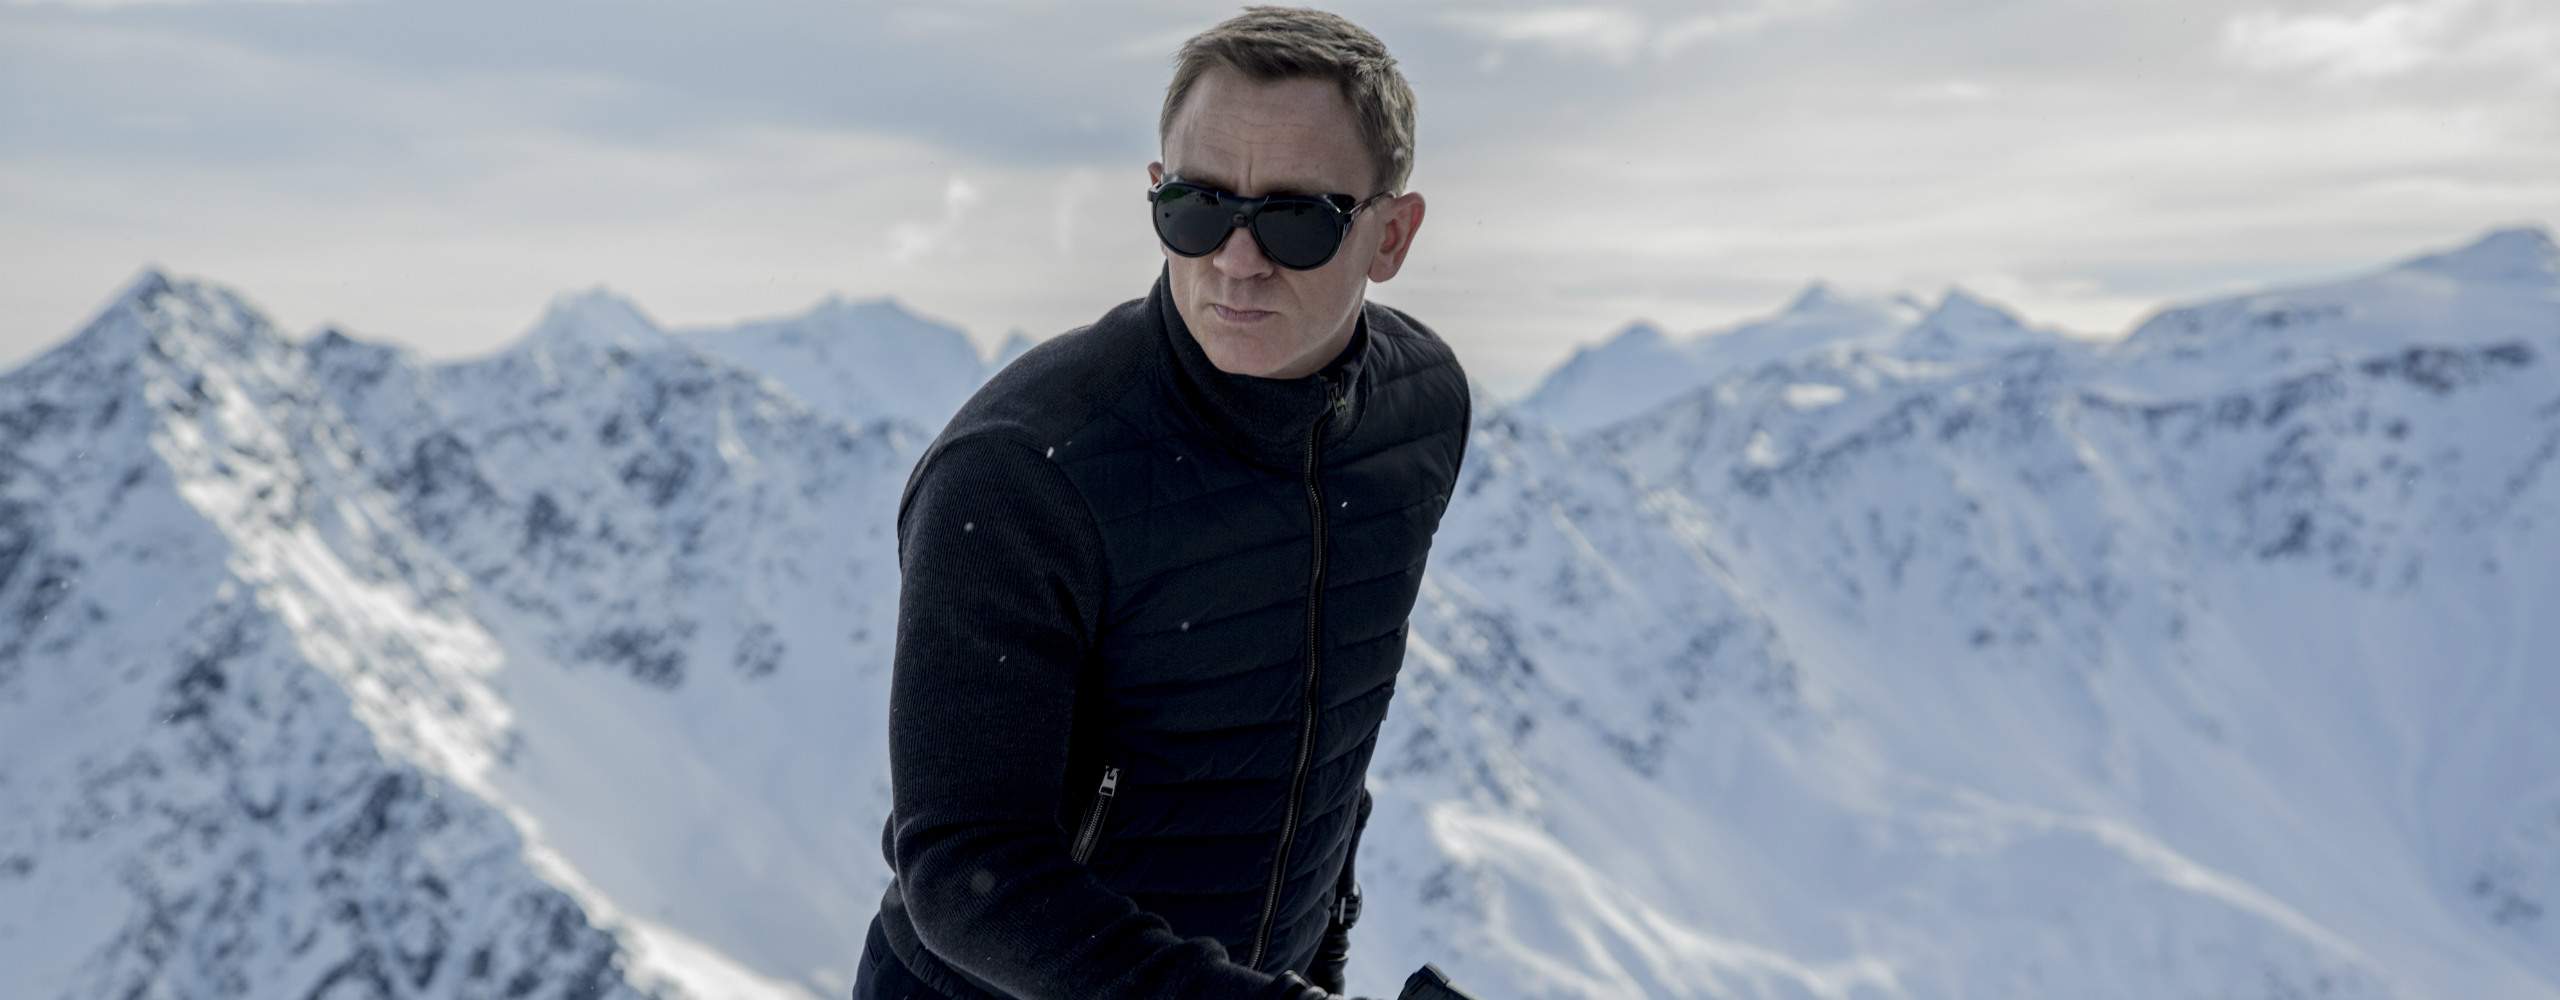 You'll Soon Be Able to Visit a James Bond Museum Built Into an Austrian Mountain